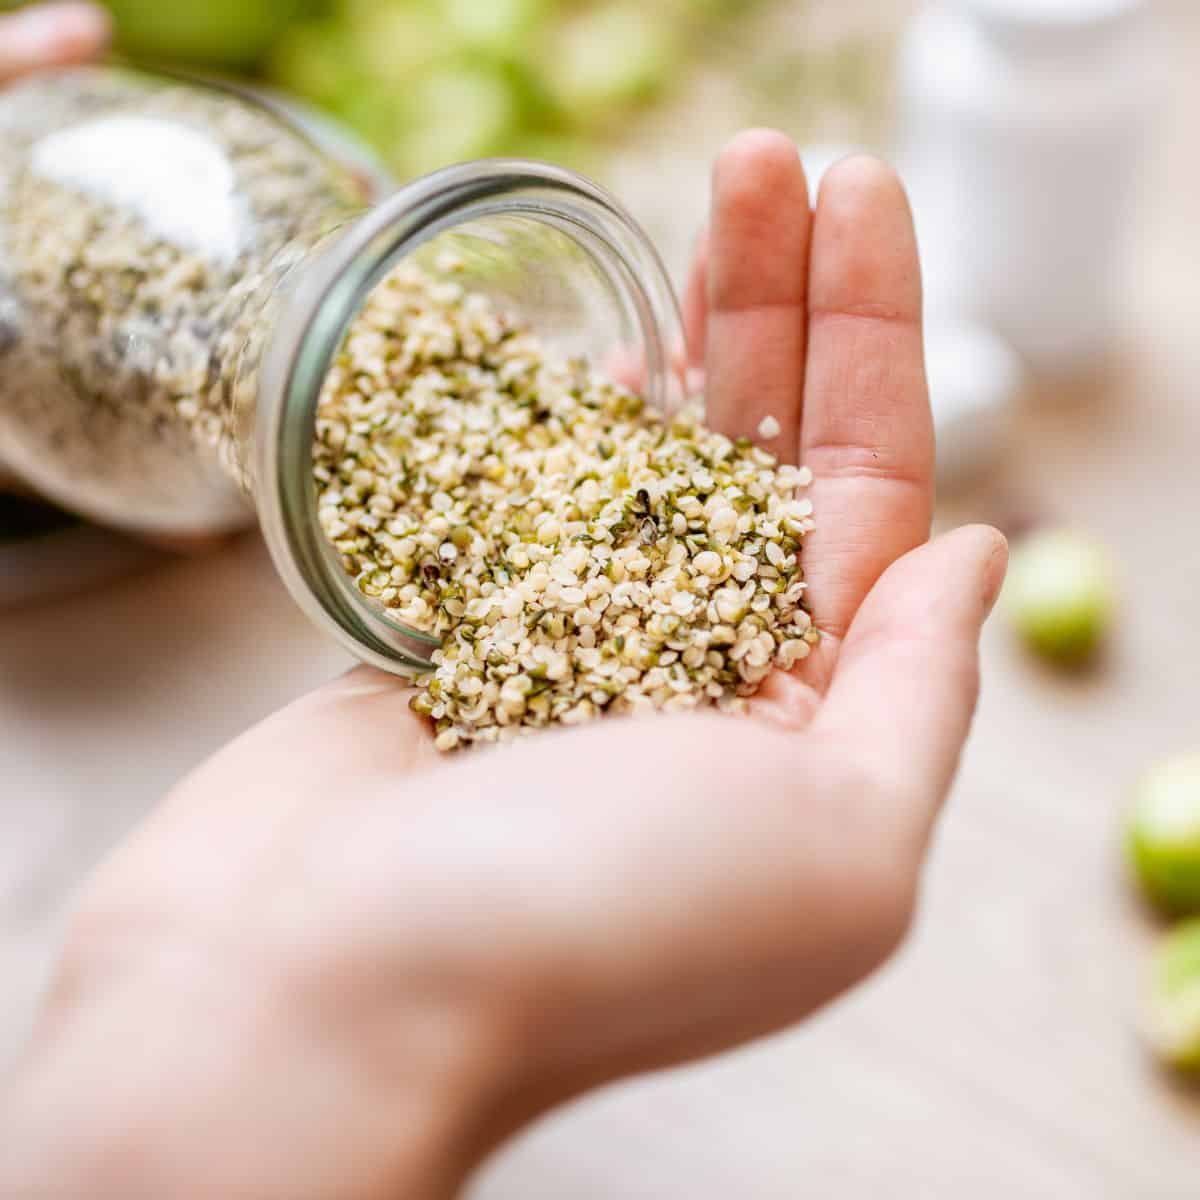 hemp seeds being poured into a hand